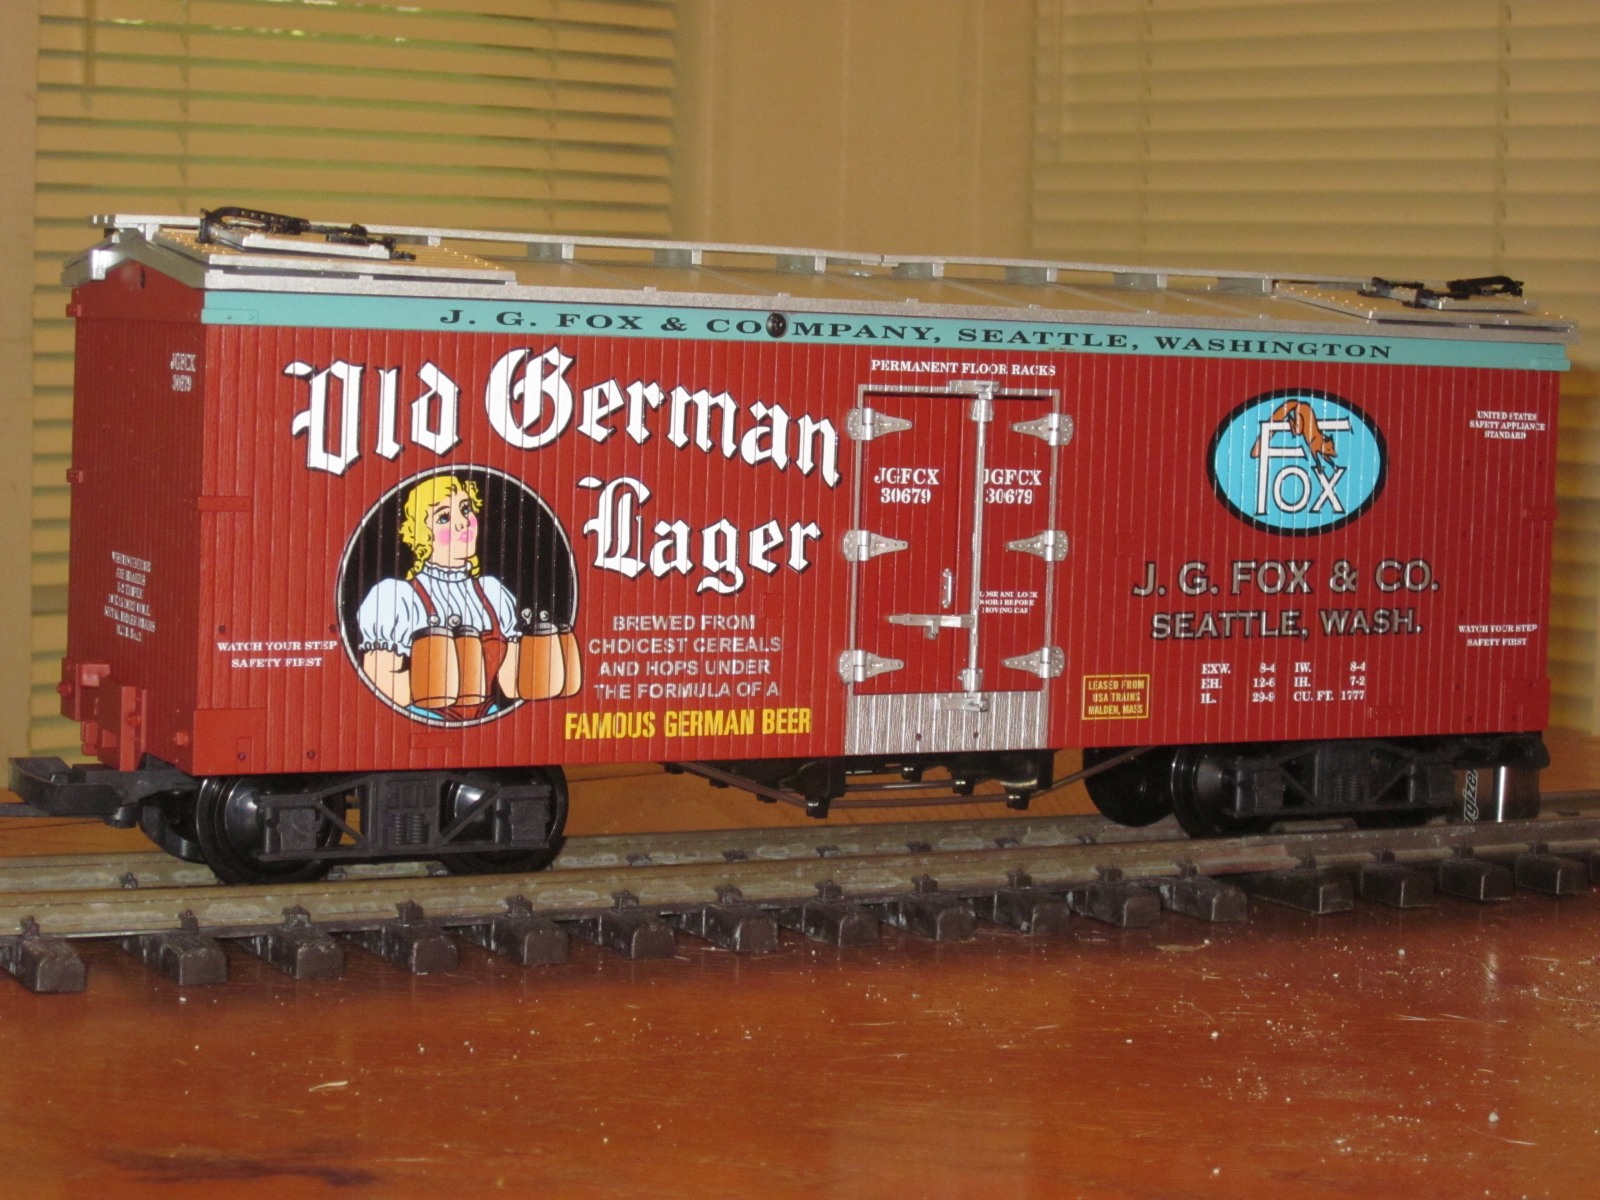 R16430 Old German Lager JGFCX 30679